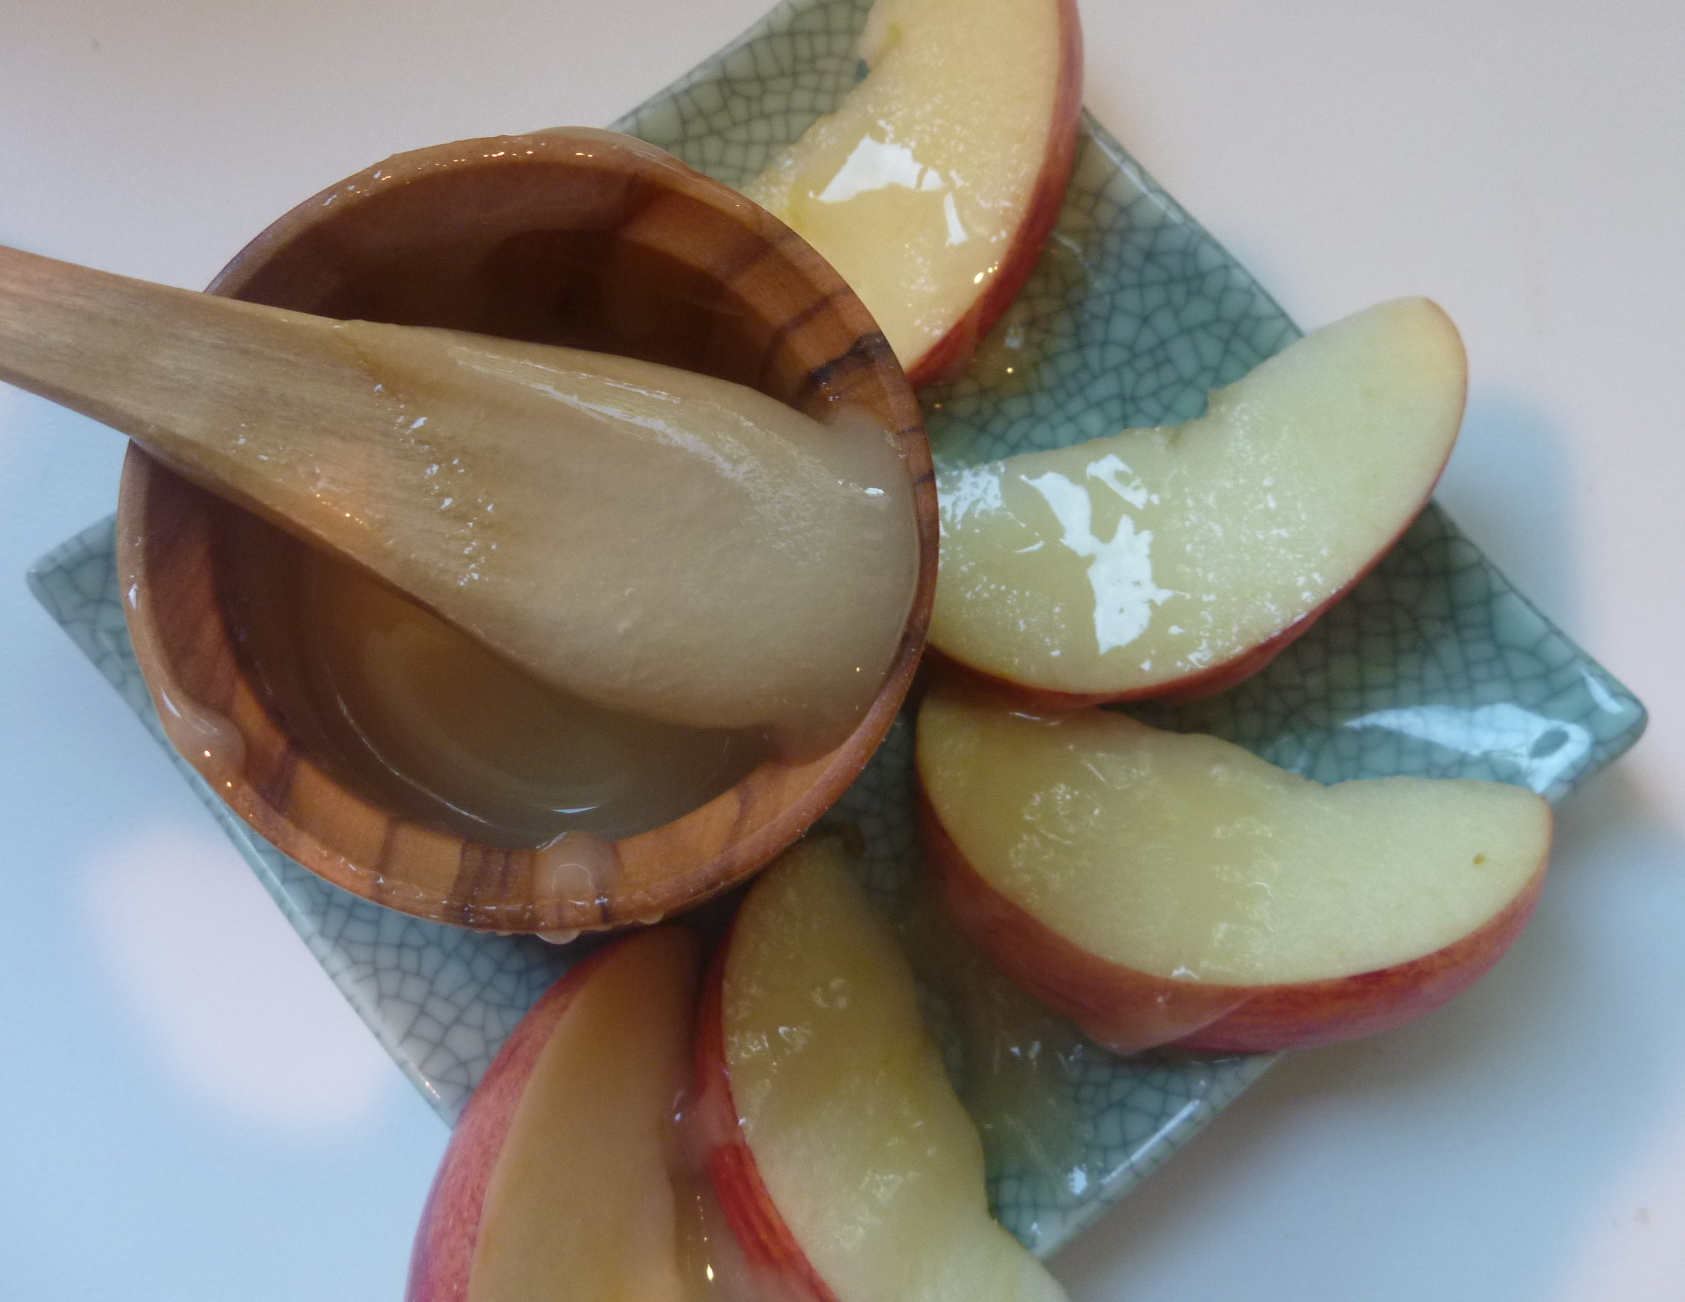 Apples and Honey: a symbol of healthy living!